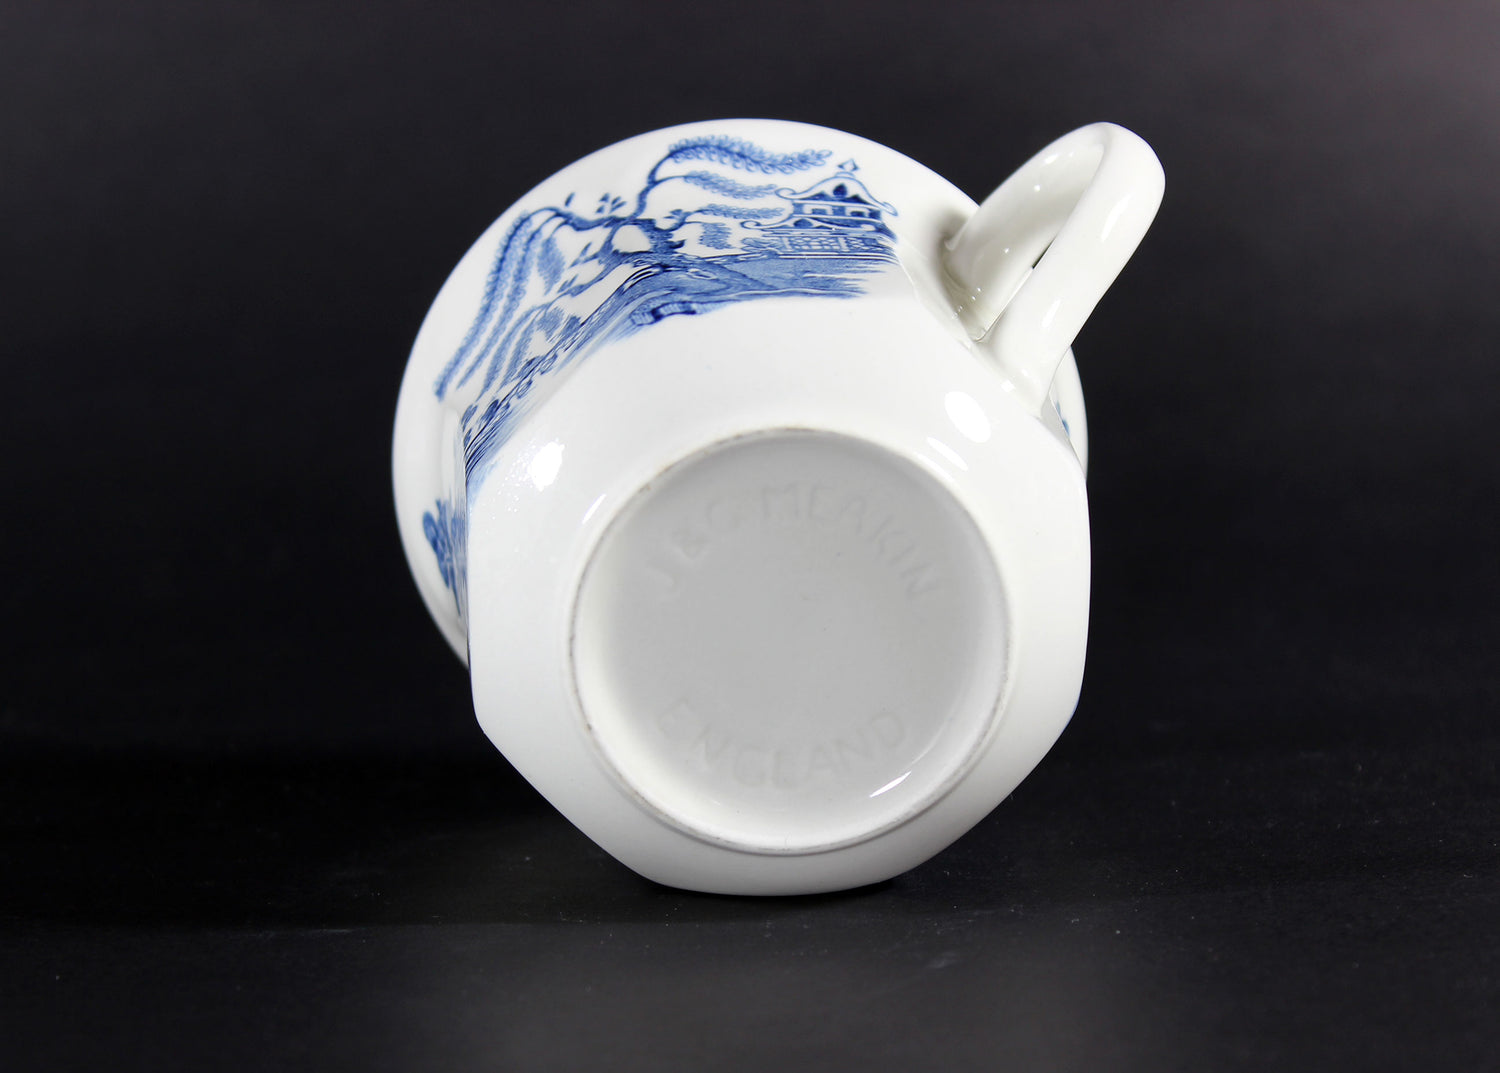 Blue Willow, Teacup, Meakin, Staffordshire